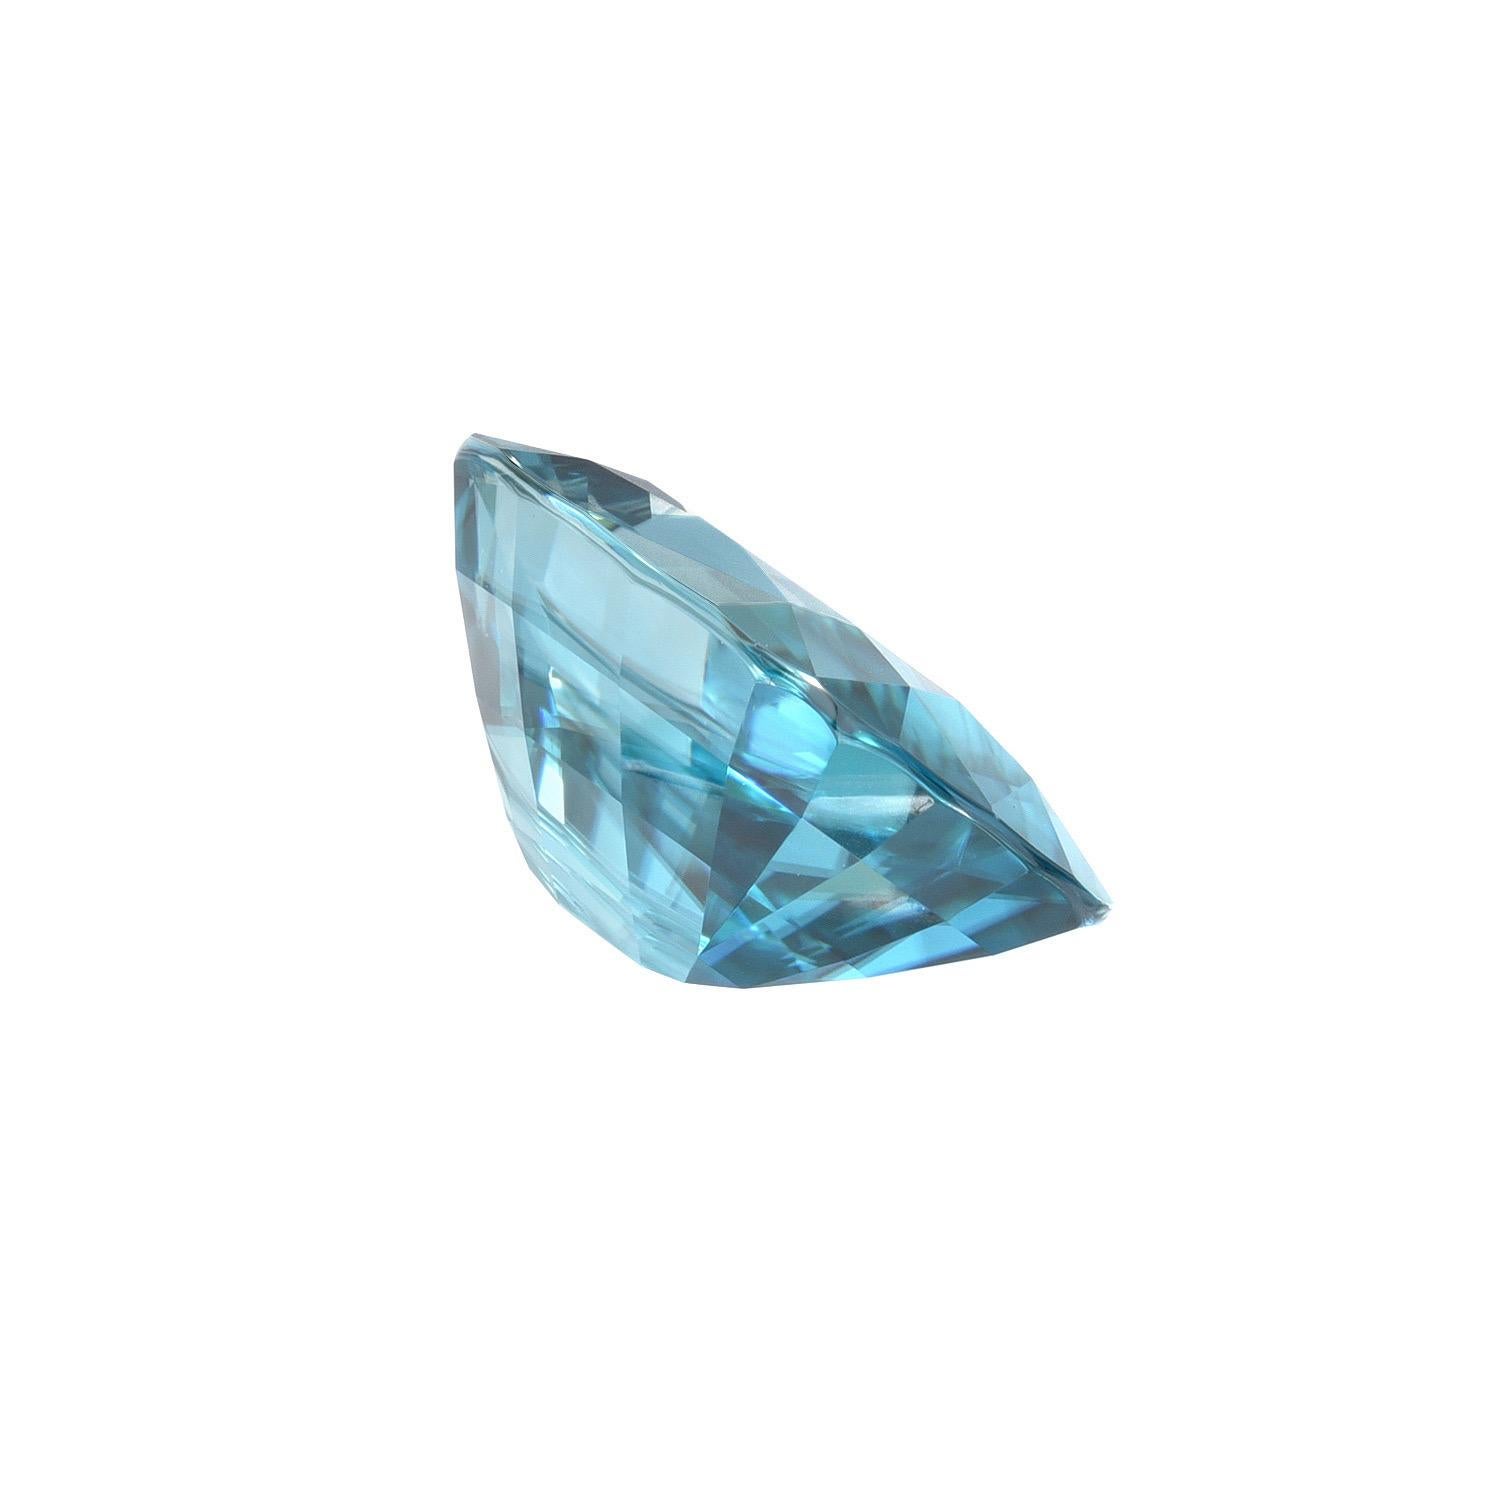 Breathtaking 8.00 carat unmounted Blue Zircon cushion gem offered loose to a sophisticated gemstone collector. 
Returns are accepted and paid by us within 7 days of delivery. 
We offer supreme custom jewelry work upon request. Please contact us for